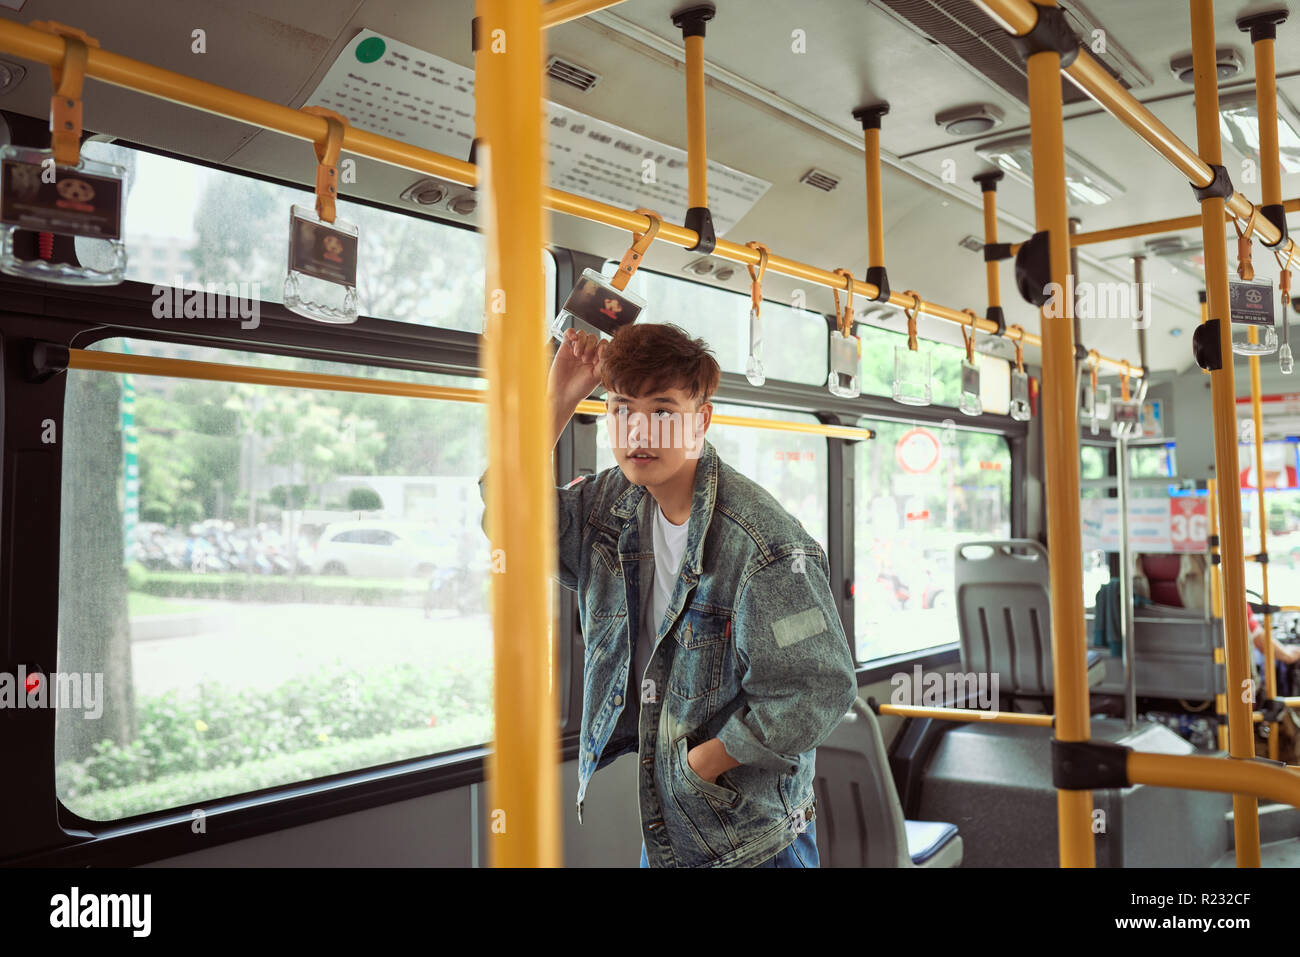 Young cheerful handsome man is holding onto the bar while standing in a bus. Stock Photo